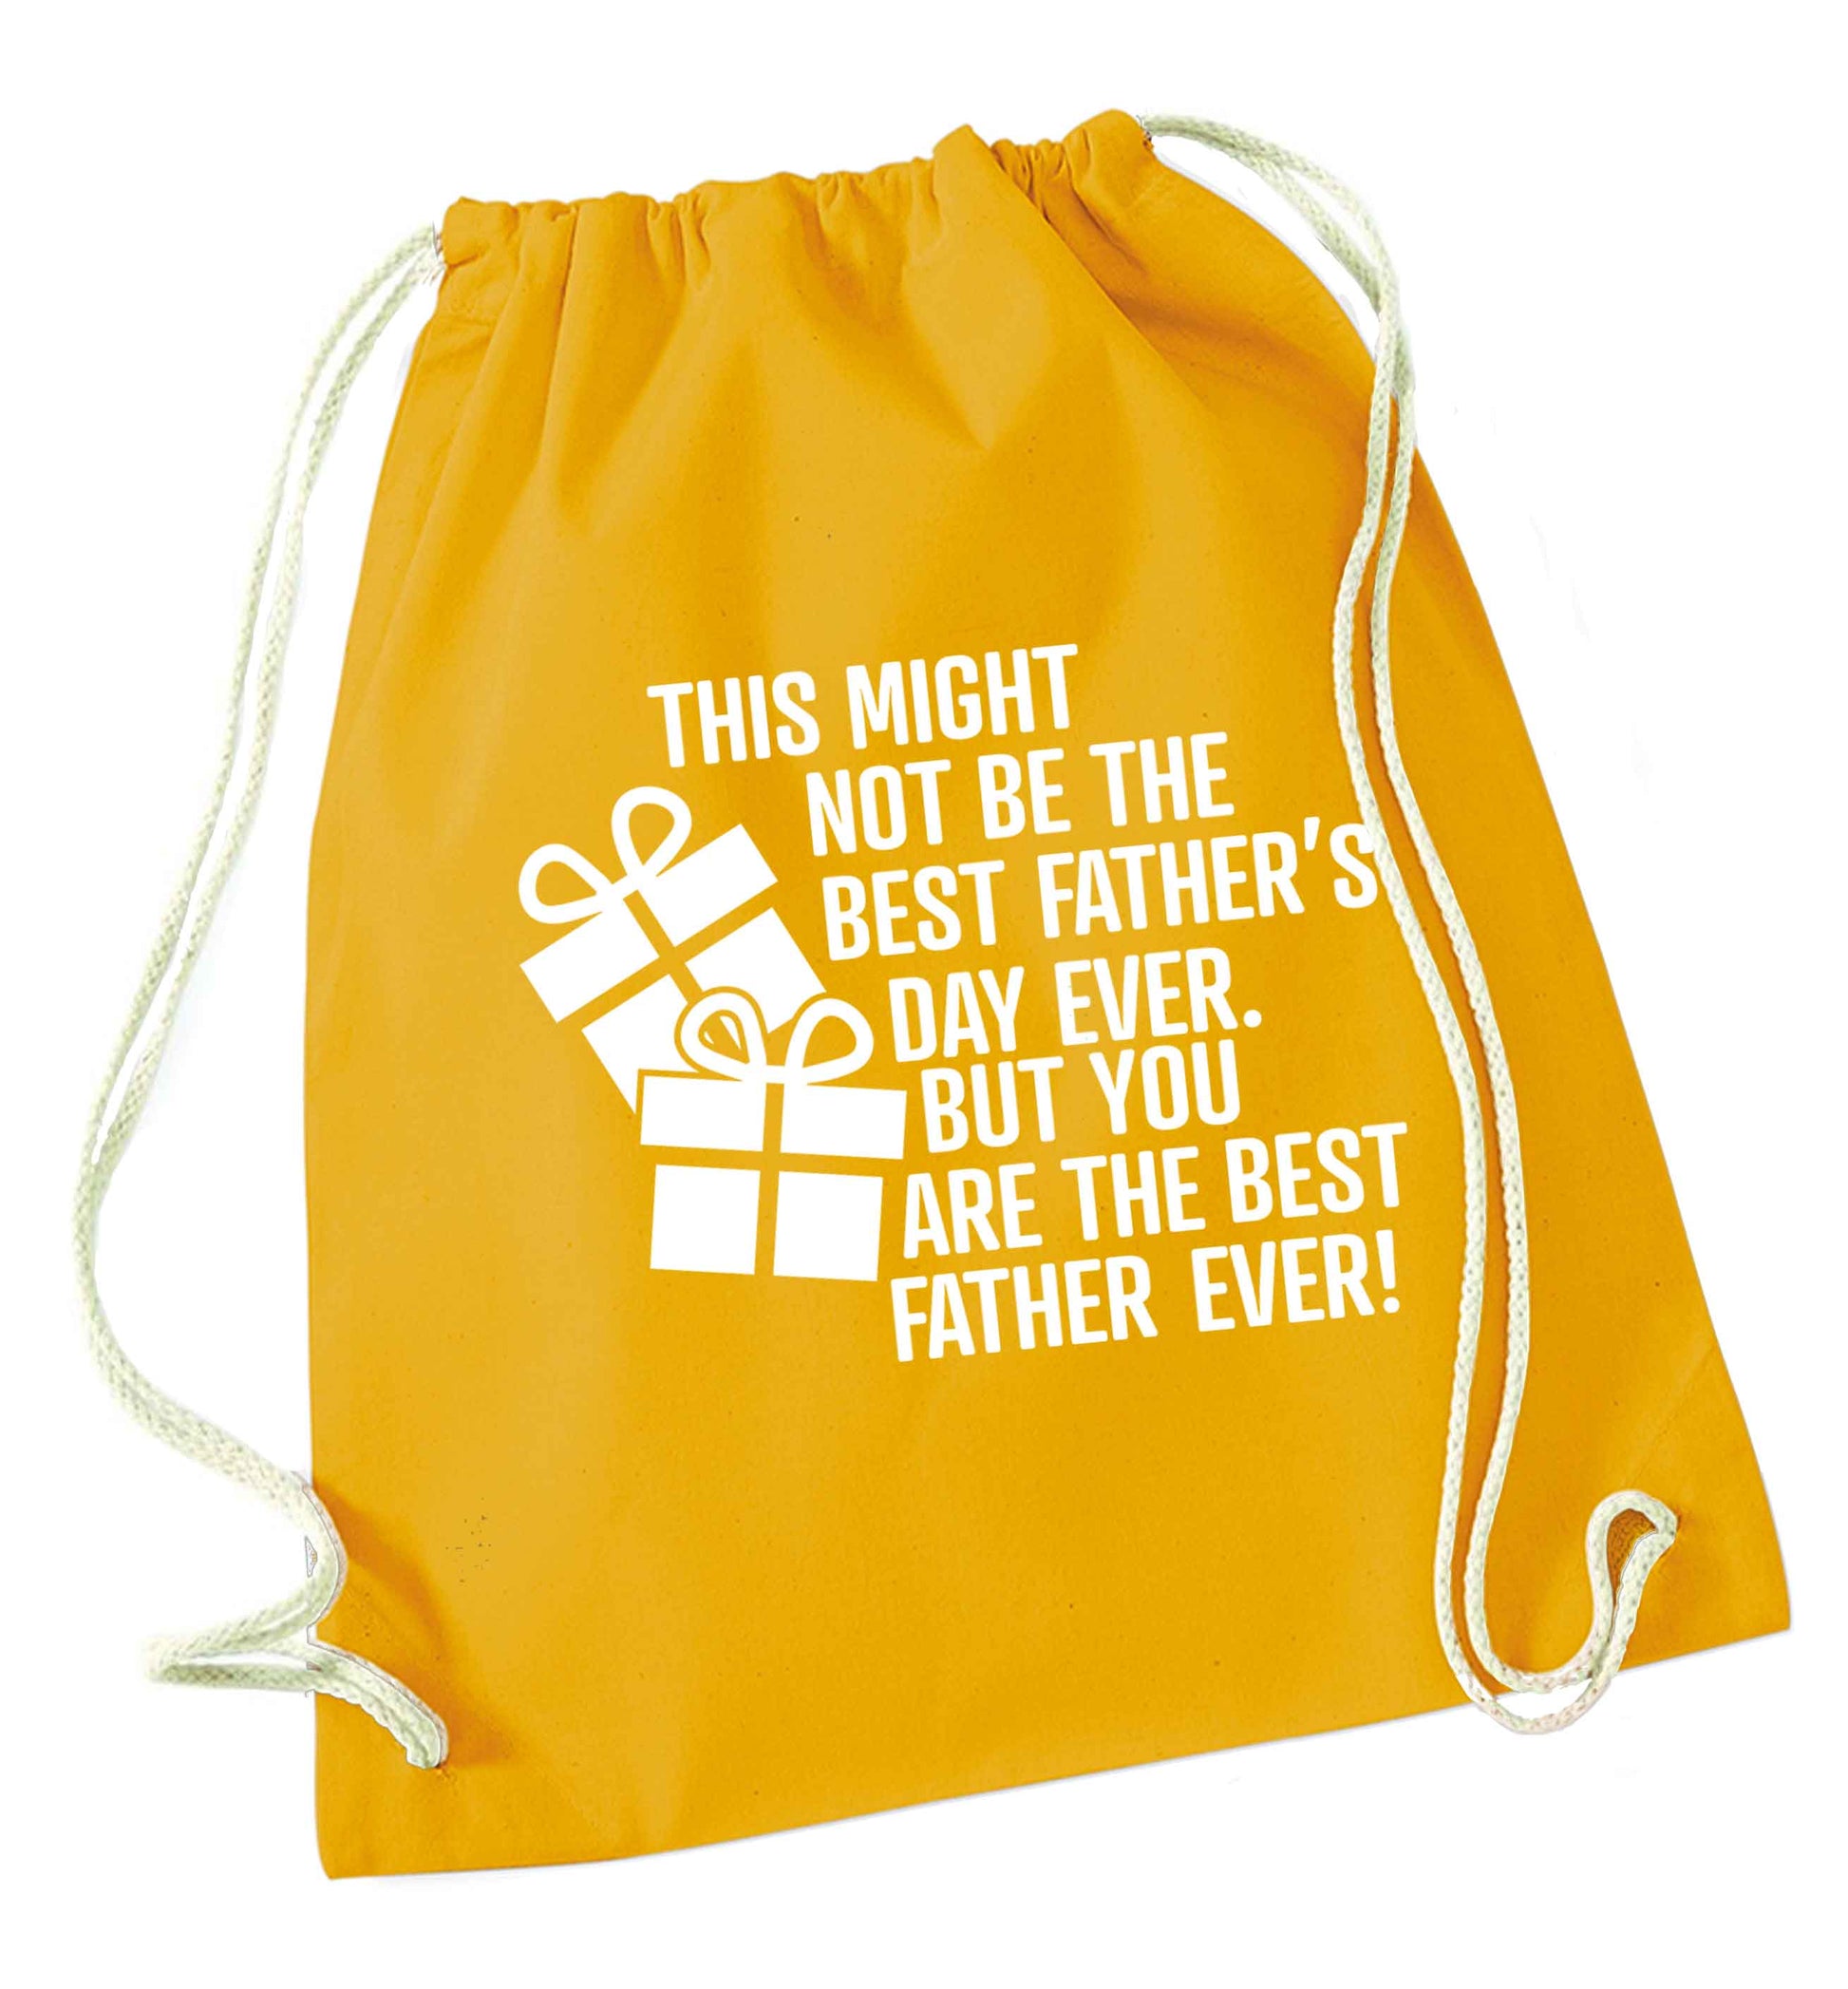 It might not be the best Father's Day ever but you are the best father ever! mustard drawstring bag